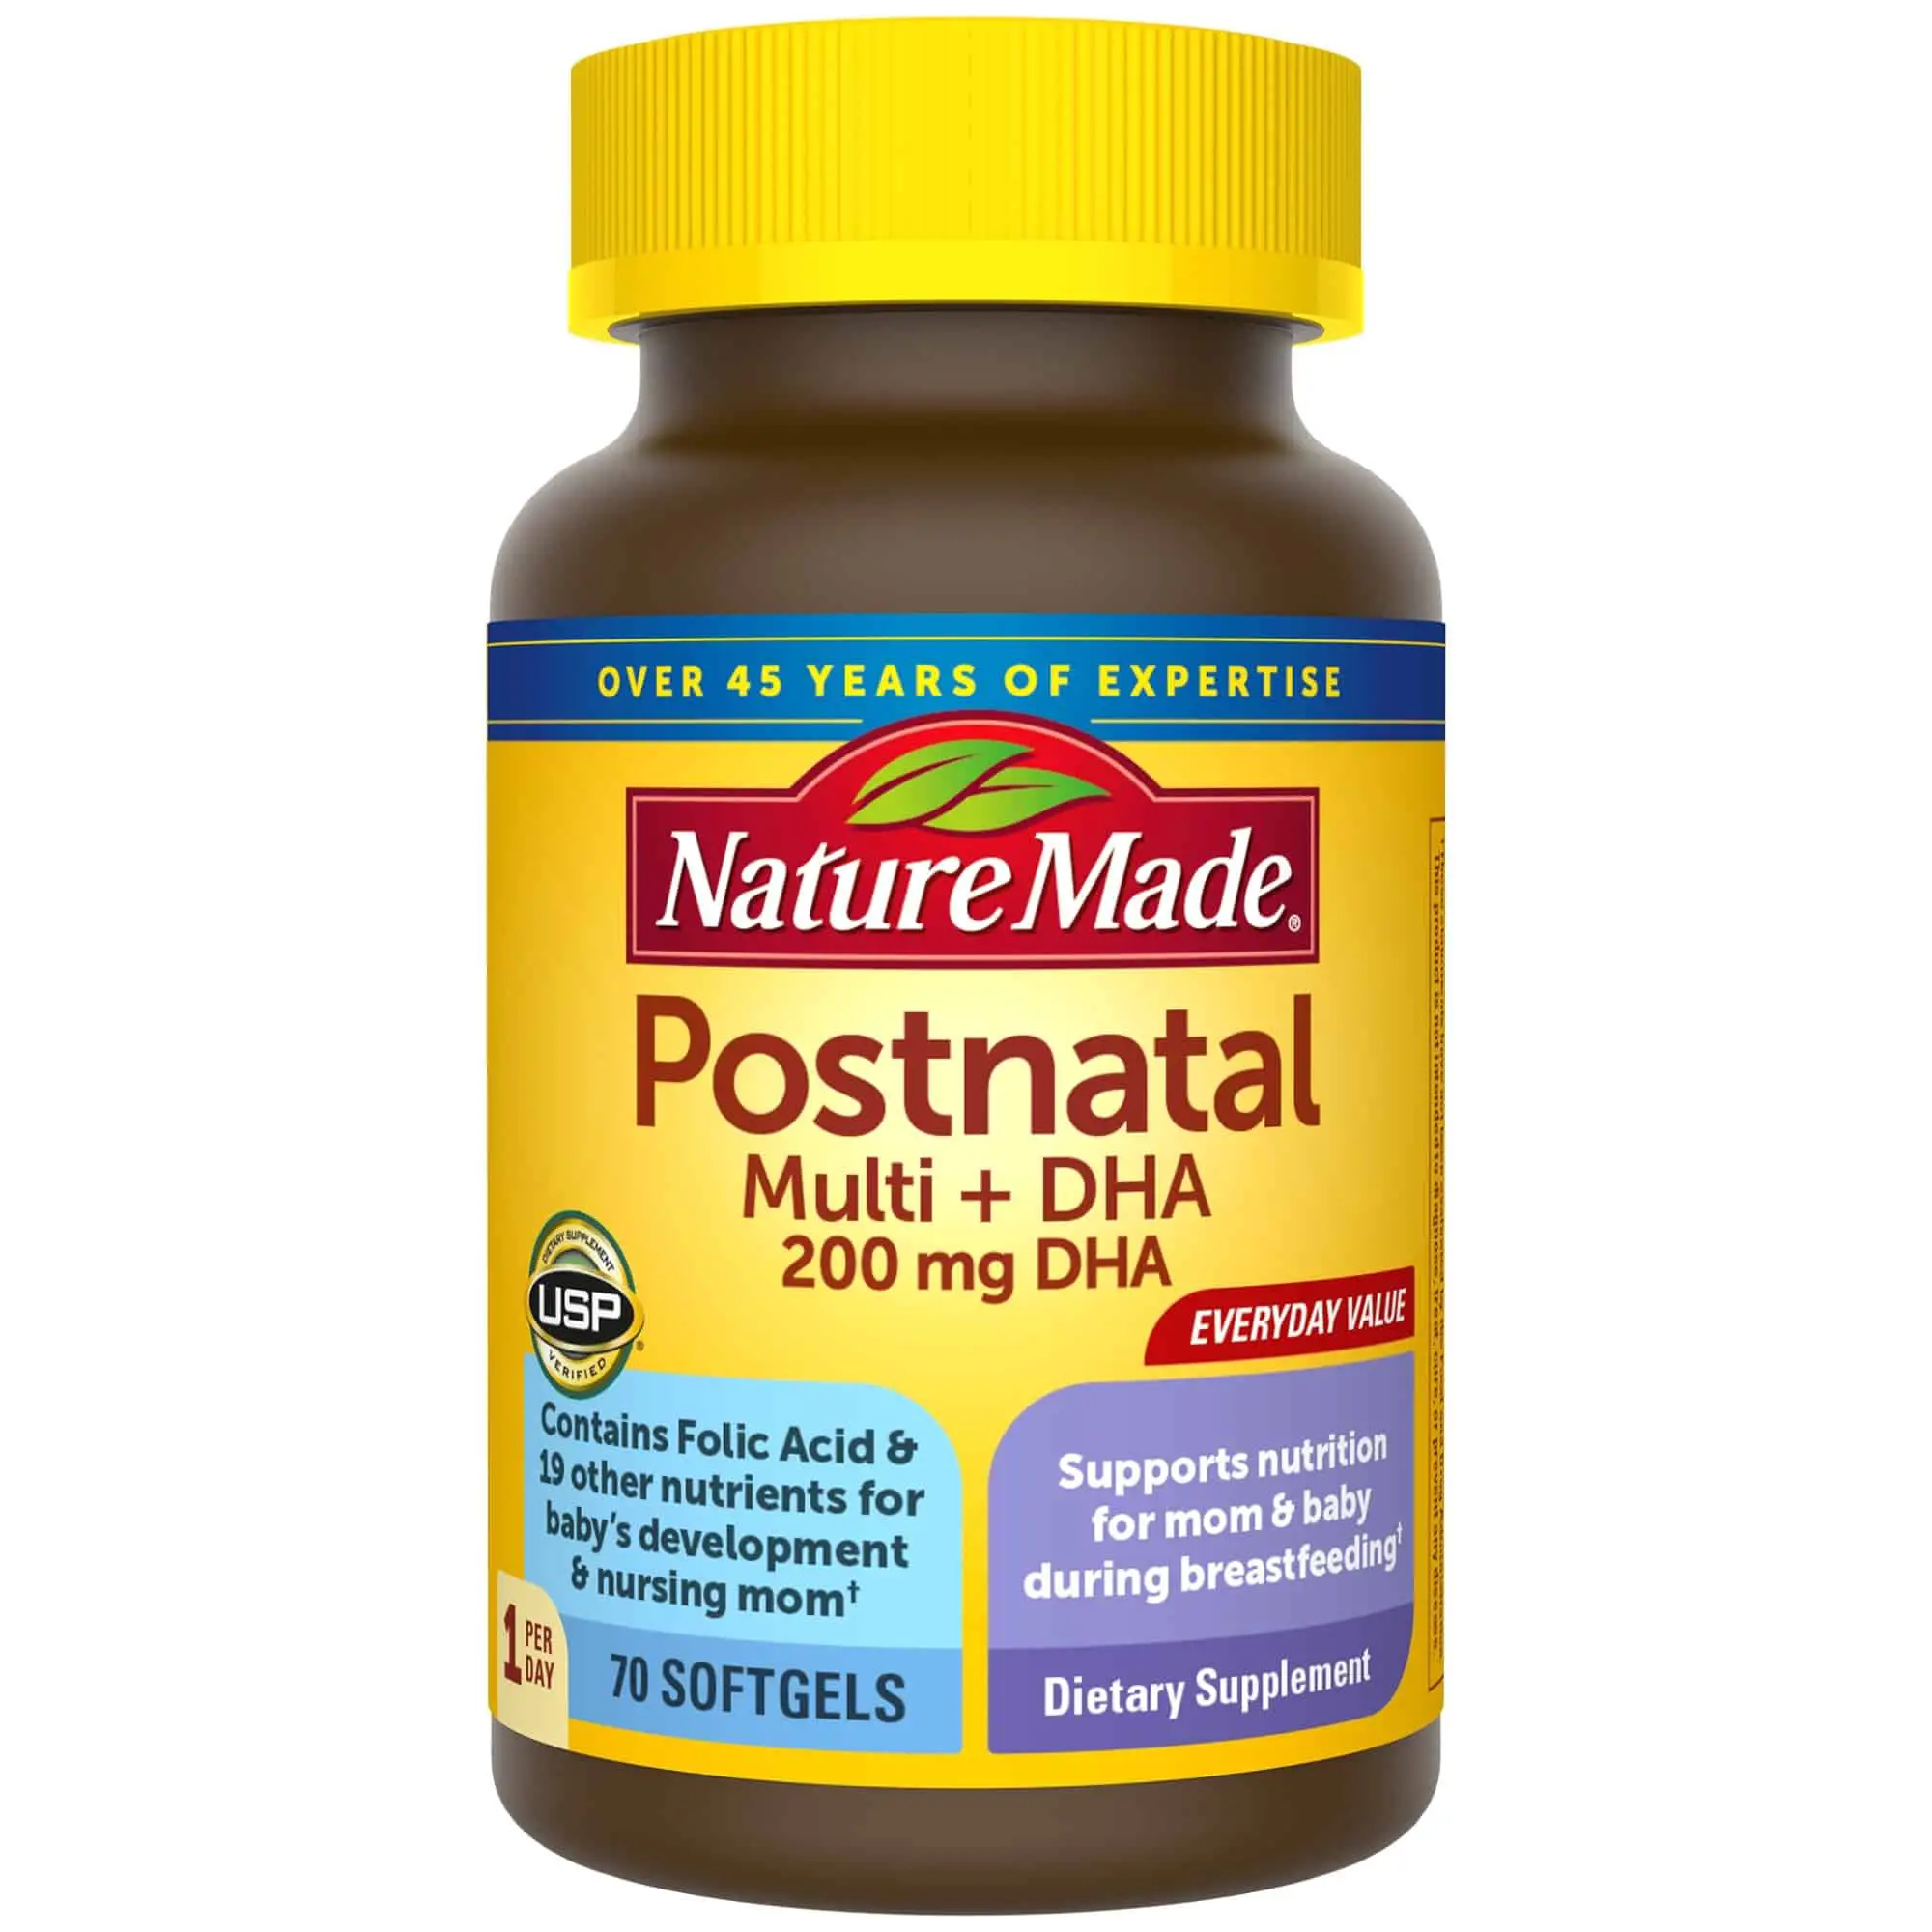 Nature Made Postnatal Multivitamin + DHA Softgels, 70 Count for Daily ...